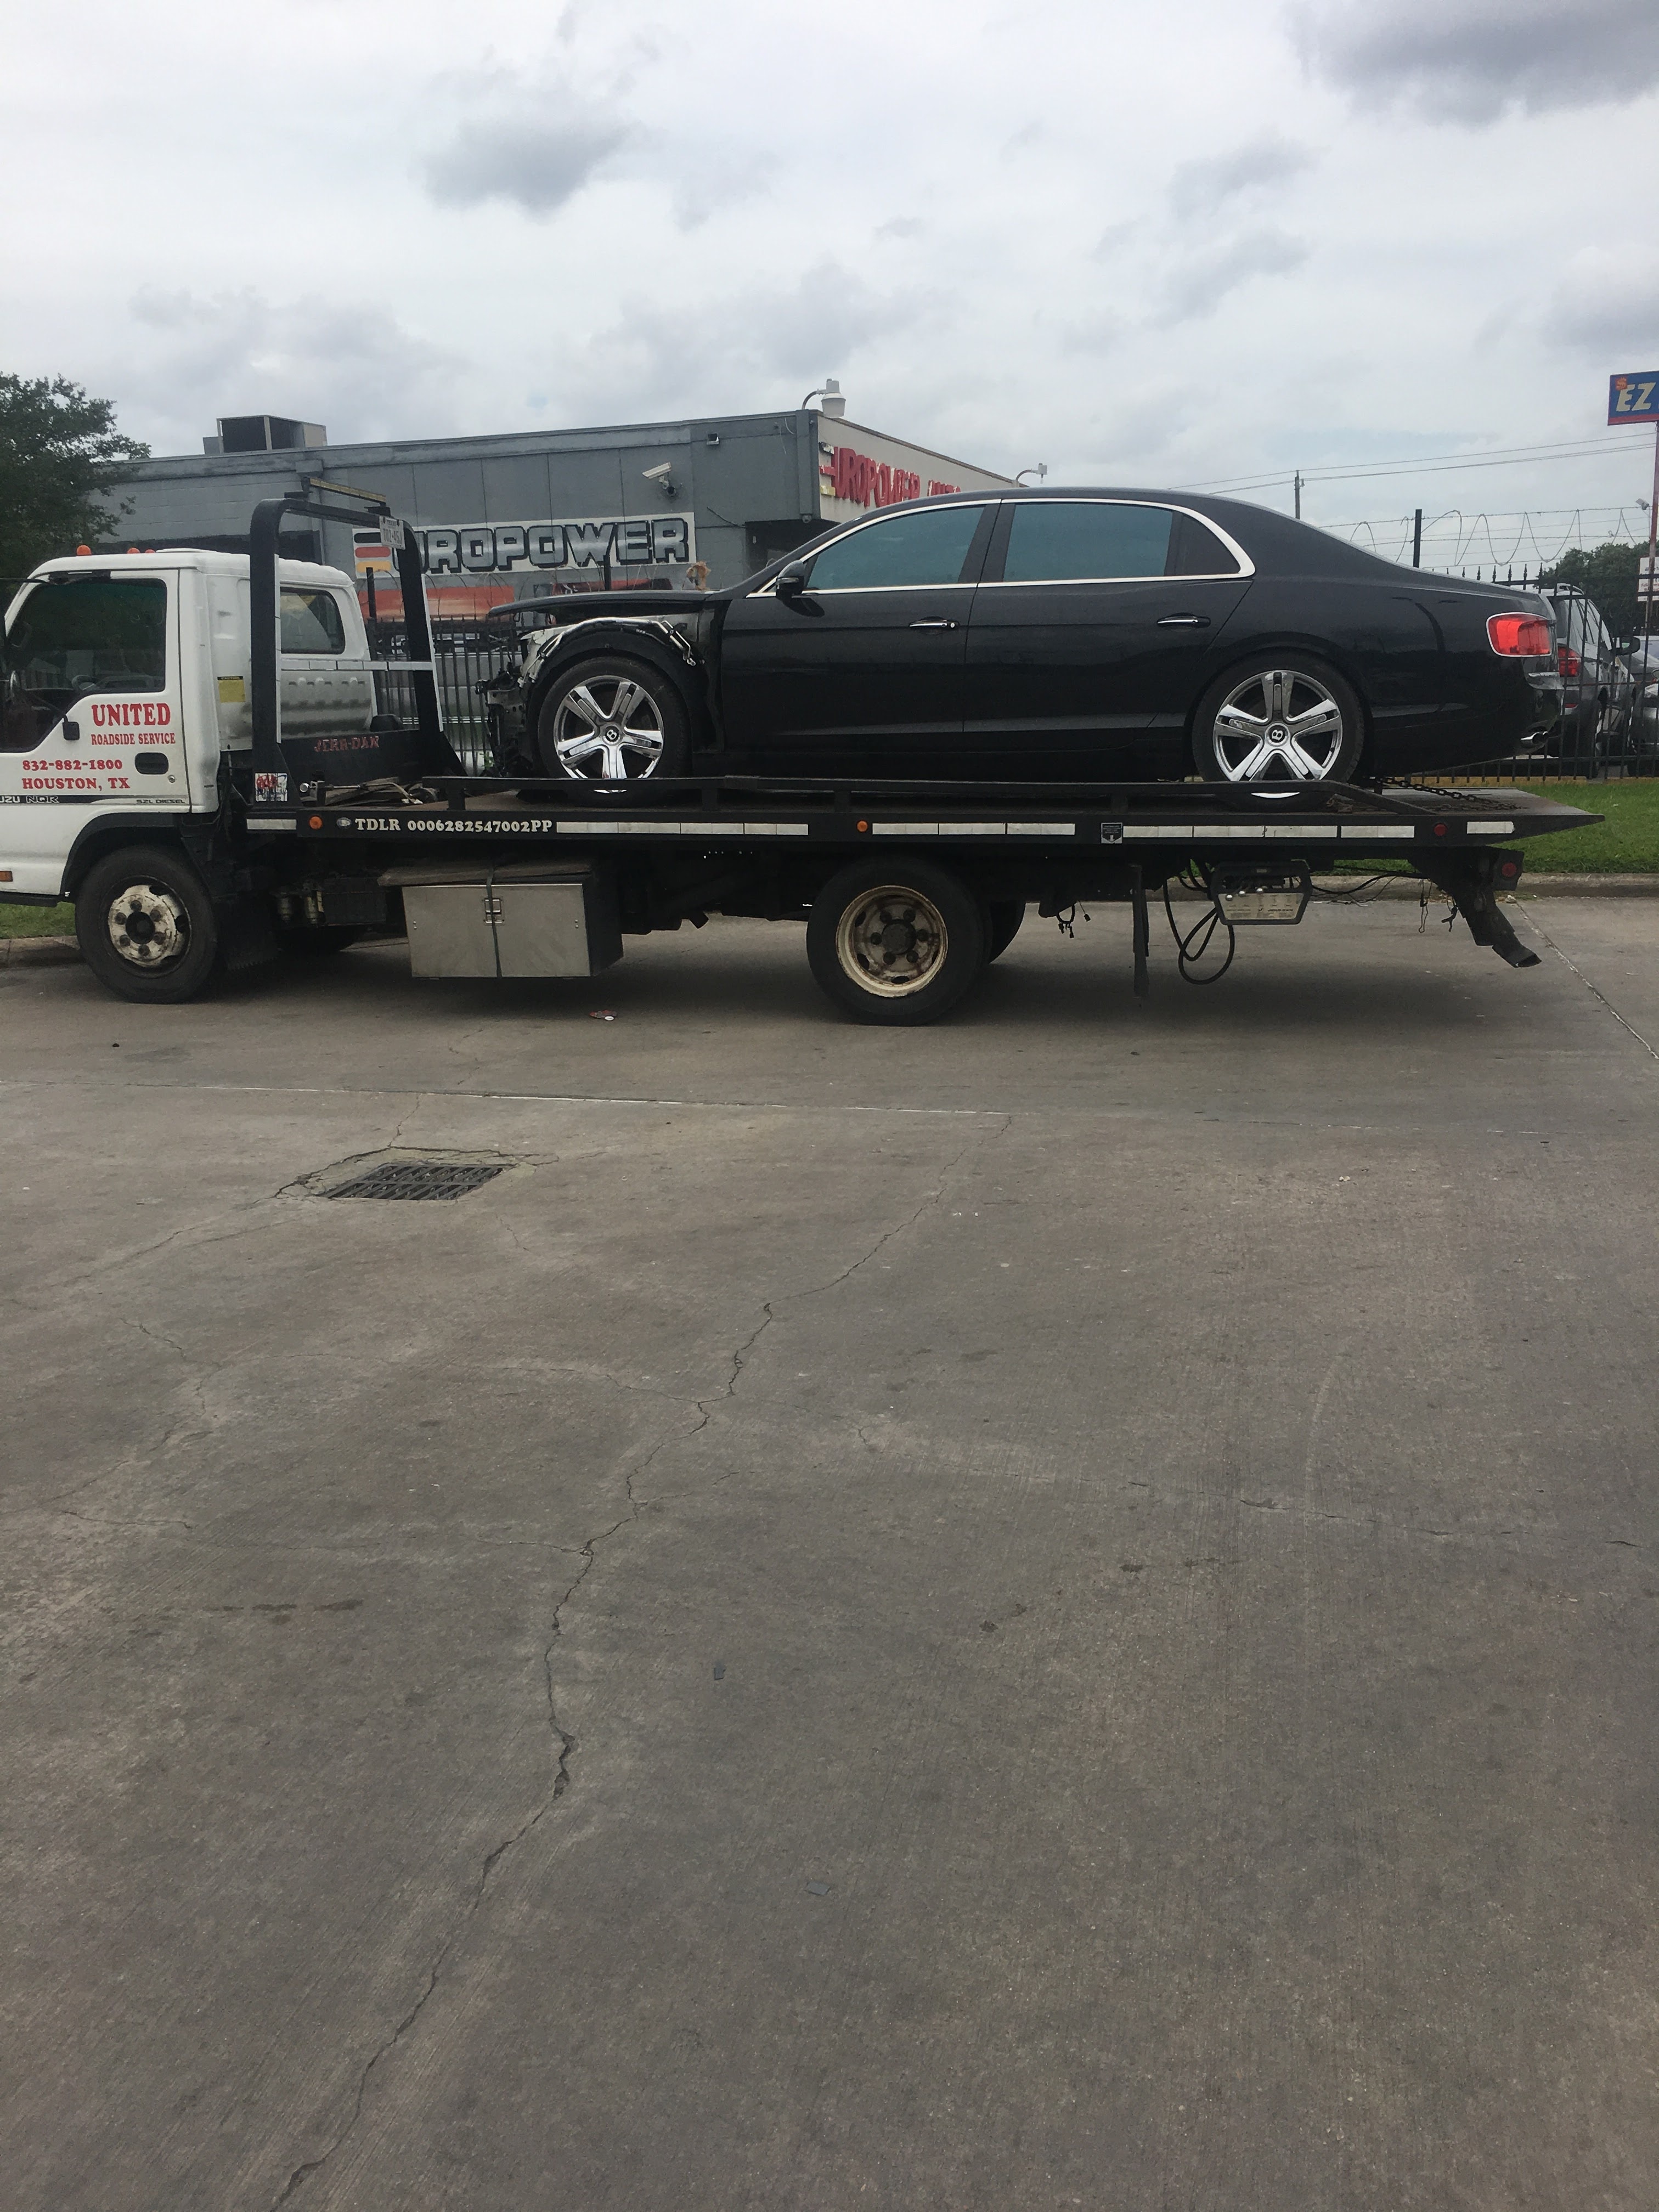 United Roadside & Towing Service - Houston, TX, US, 24 hour tow truck